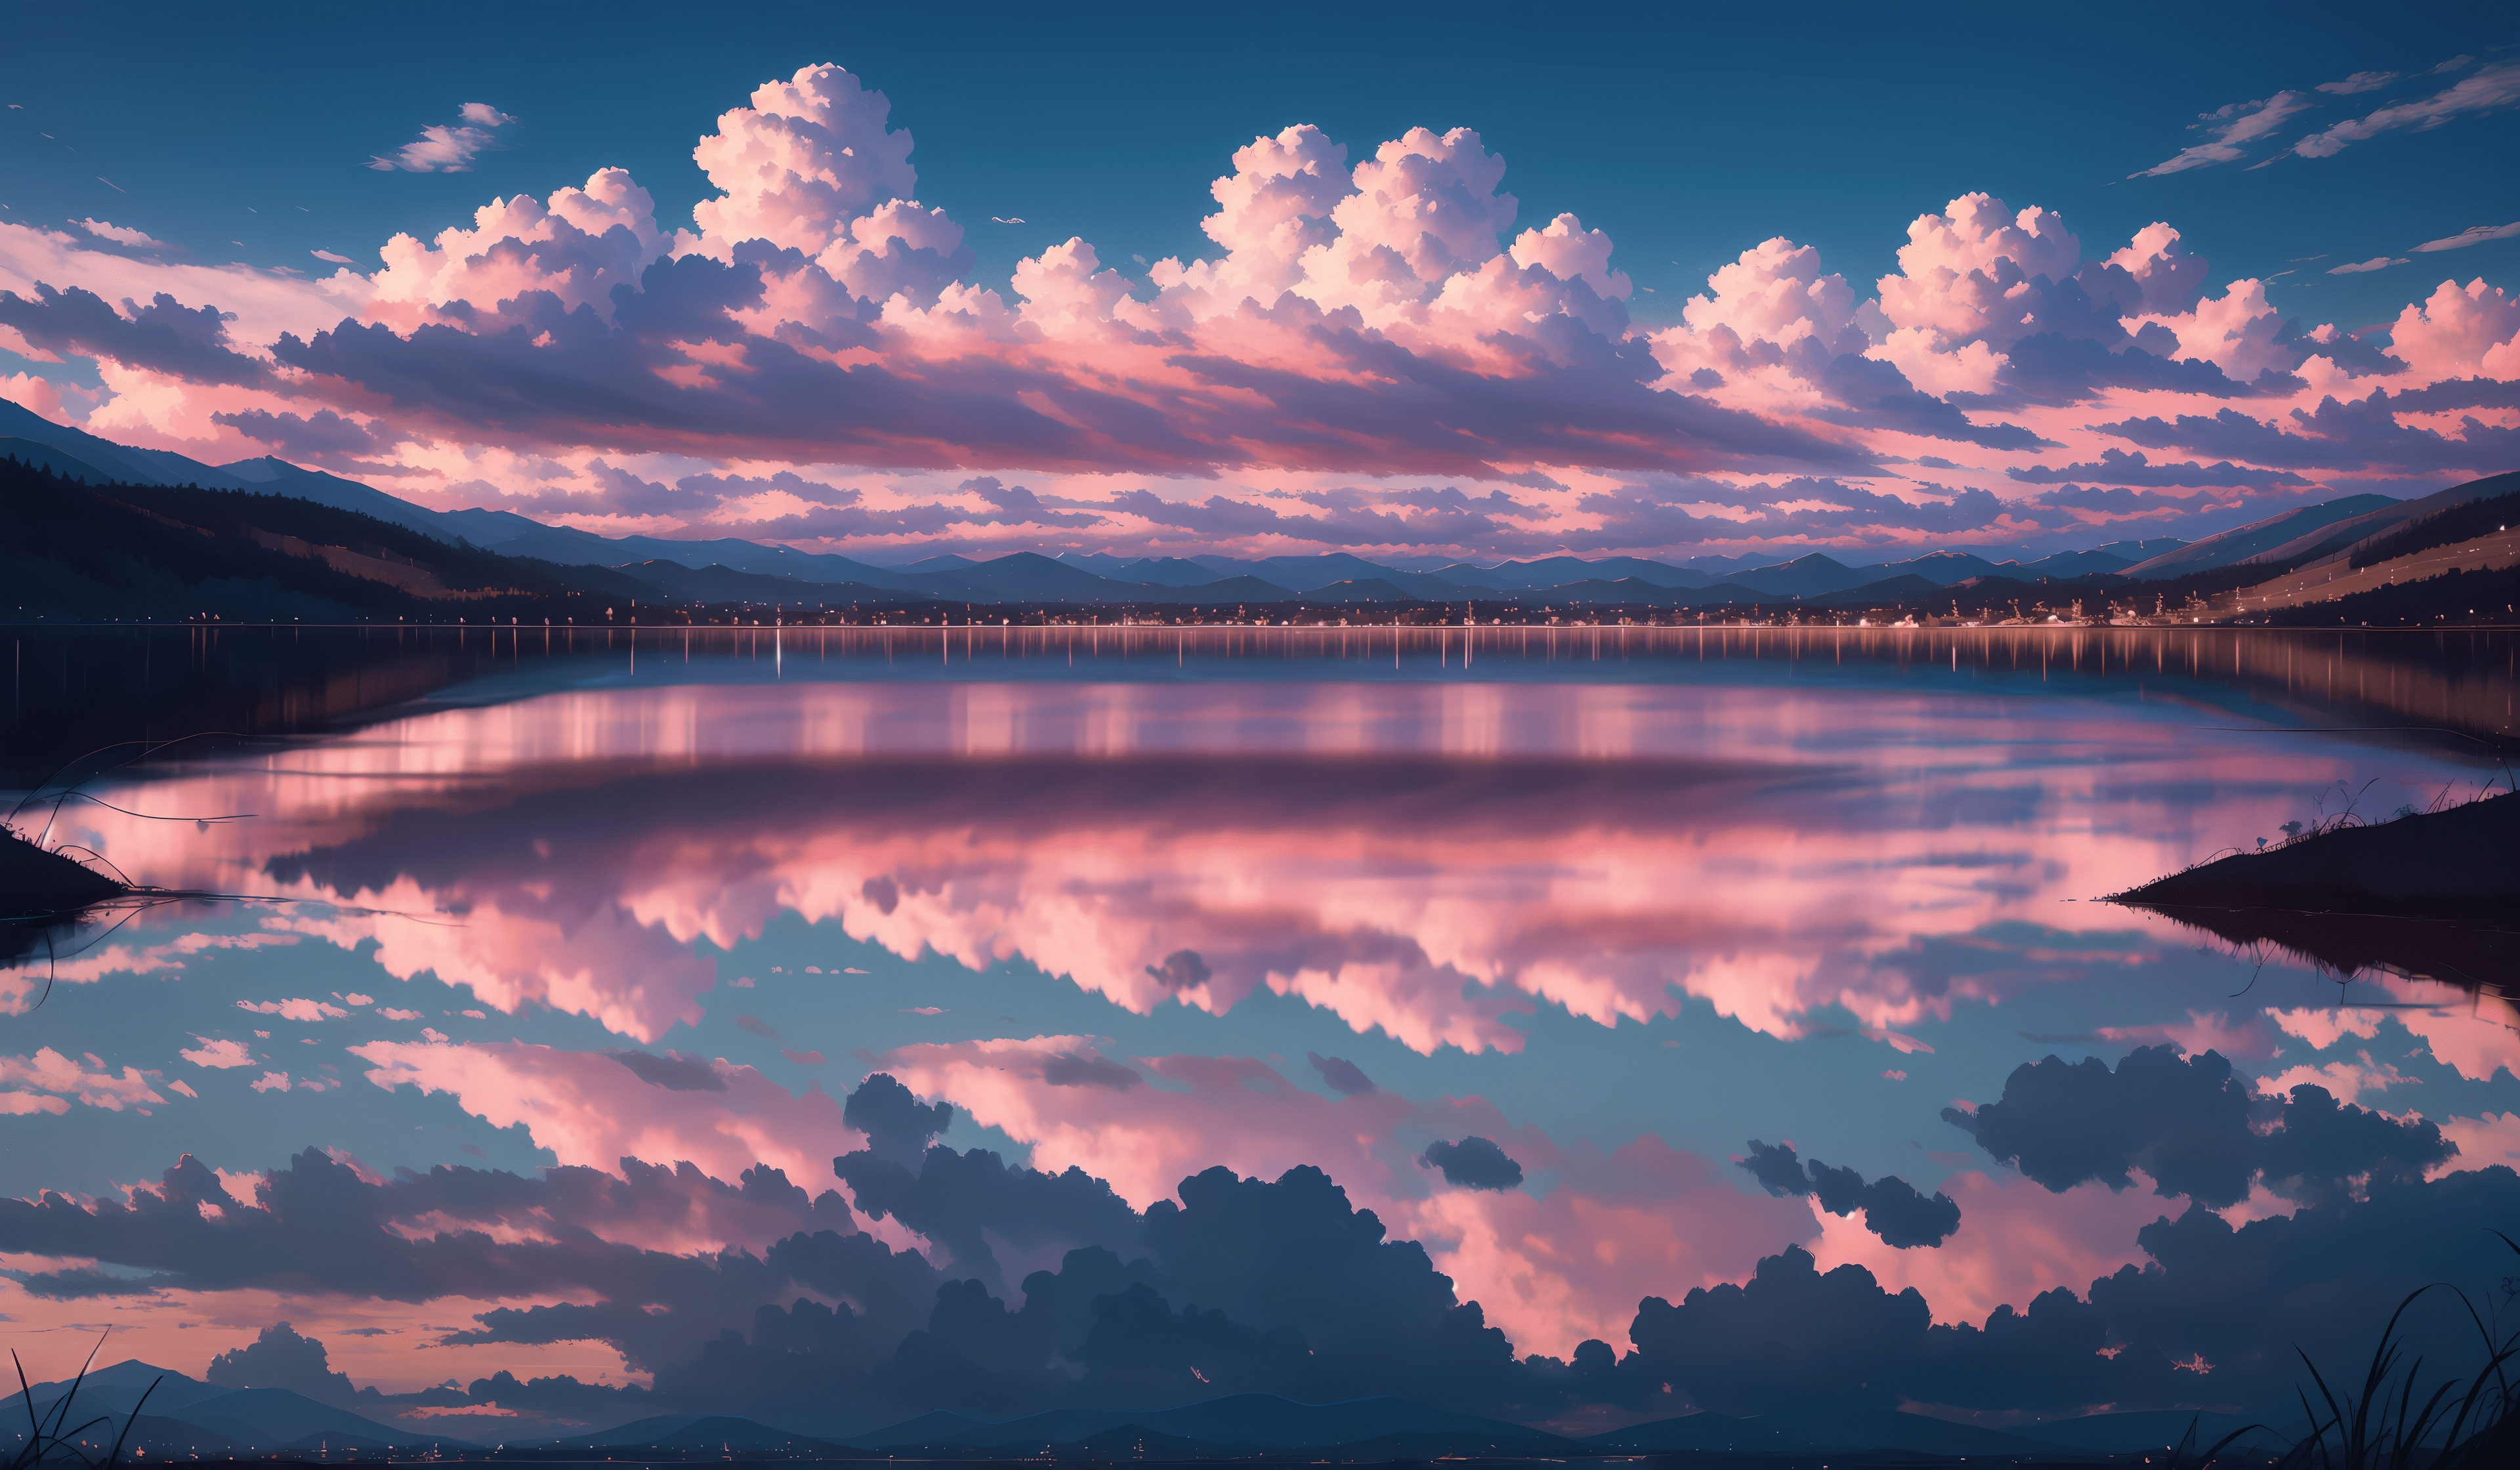 A painting of a pink sunset over a lake - Anime landscape